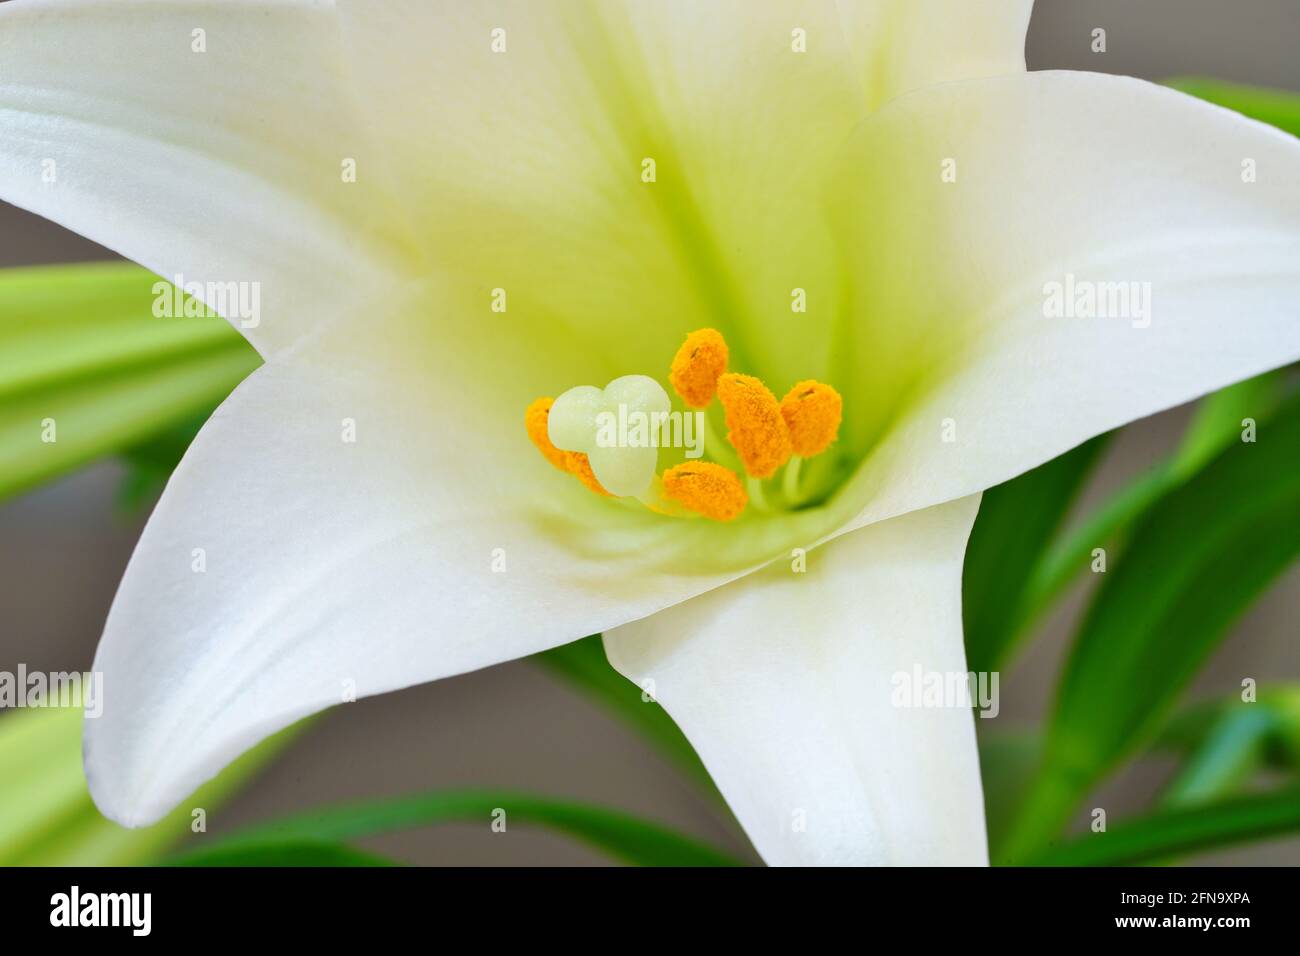 Fragrant white and yellow trumpet flowers of Easter Lily flowers (lilium longiflorum) in the spring Stock Photo